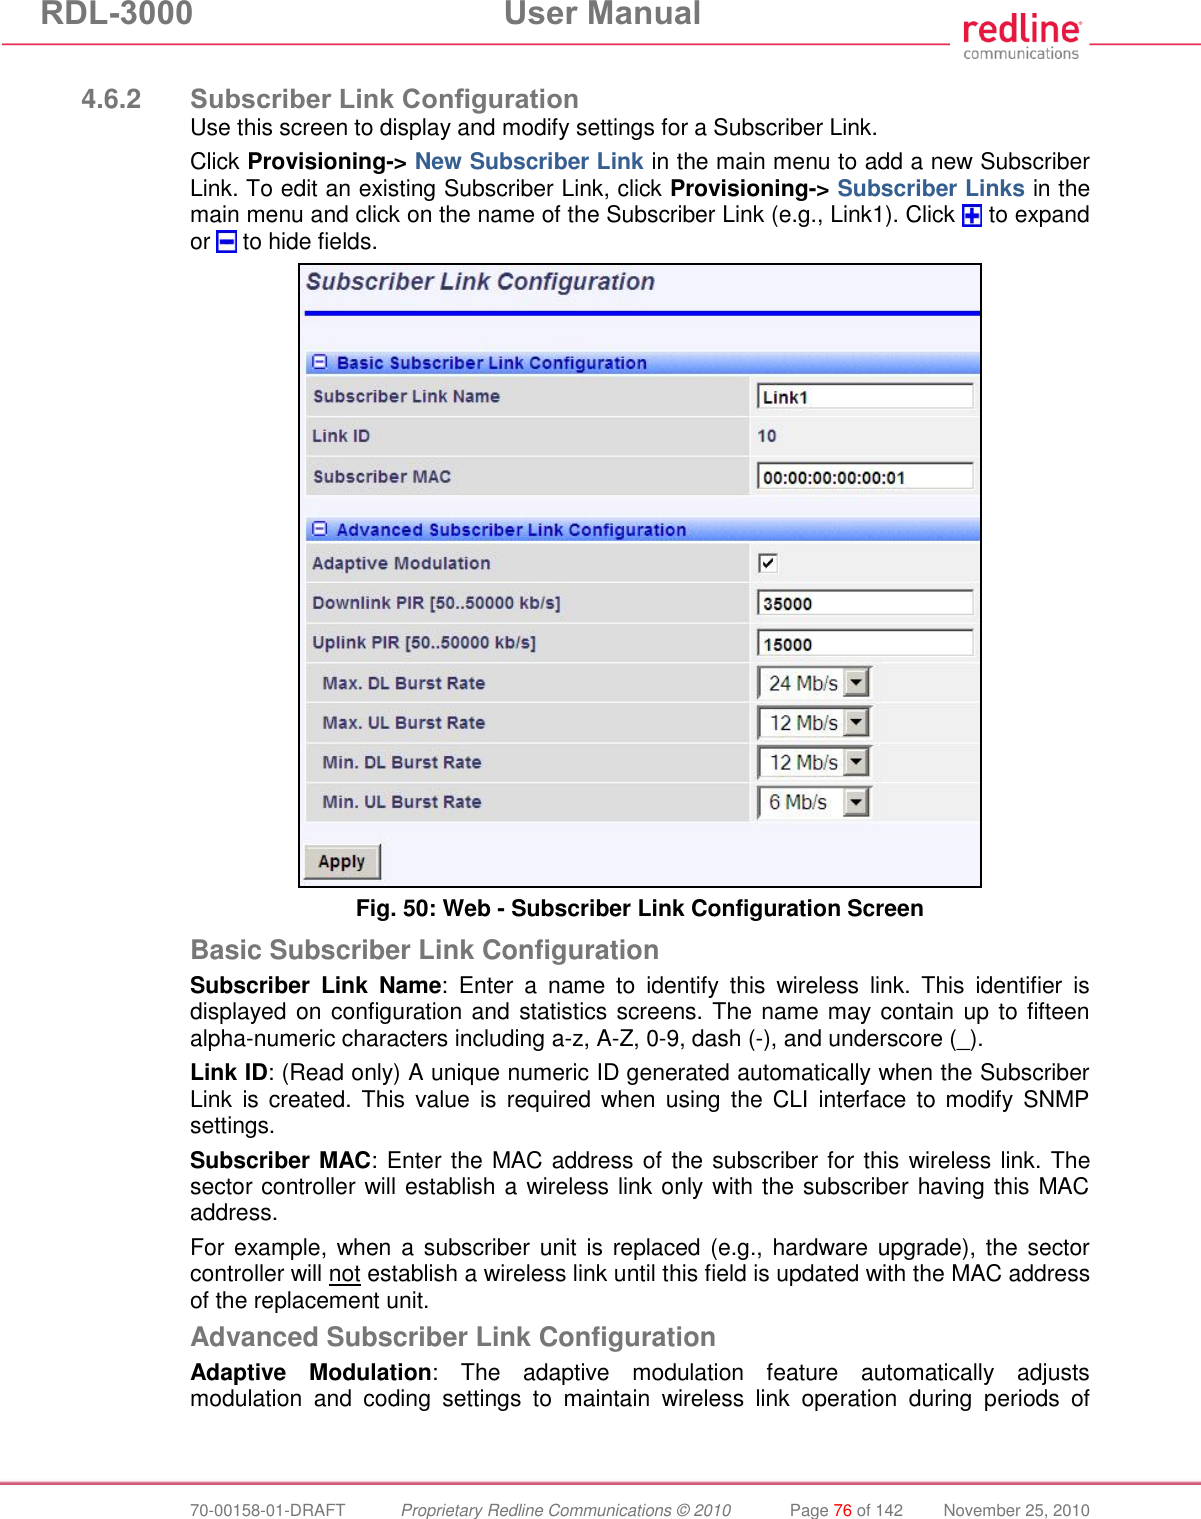 RDL-3000  User Manual  70-00158-01-DRAFT  Proprietary Redline Communications © 2010  Page 76 of 142  November 25, 2010  4.6.2 Subscriber Link Configuration Use this screen to display and modify settings for a Subscriber Link. Click Provisioning-&gt; New Subscriber Link in the main menu to add a new Subscriber Link. To edit an existing Subscriber Link, click Provisioning-&gt; Subscriber Links in the main menu and click on the name of the Subscriber Link (e.g., Link1). Click   to expand or   to hide fields.  Fig. 50: Web - Subscriber Link Configuration Screen Basic Subscriber Link Configuration Subscriber  Link  Name:  Enter  a  name  to  identify  this  wireless  link.  This  identifier  is displayed on configuration and statistics screens. The name may contain up to fifteen alpha-numeric characters including a-z, A-Z, 0-9, dash (-), and underscore (_). Link ID: (Read only) A unique numeric ID generated automatically when the Subscriber Link  is created. This  value is  required when using  the  CLI  interface  to modify  SNMP settings. Subscriber MAC: Enter the MAC address of the subscriber for this  wireless link. The sector controller will establish a wireless link only with the subscriber having this MAC address. For example, when a subscriber unit is replaced (e.g.,  hardware upgrade), the sector controller will not establish a wireless link until this field is updated with the MAC address of the replacement unit. Advanced Subscriber Link Configuration Adaptive  Modulation:  The  adaptive  modulation  feature  automatically  adjusts modulation  and  coding  settings  to  maintain  wireless  link  operation  during  periods  of 